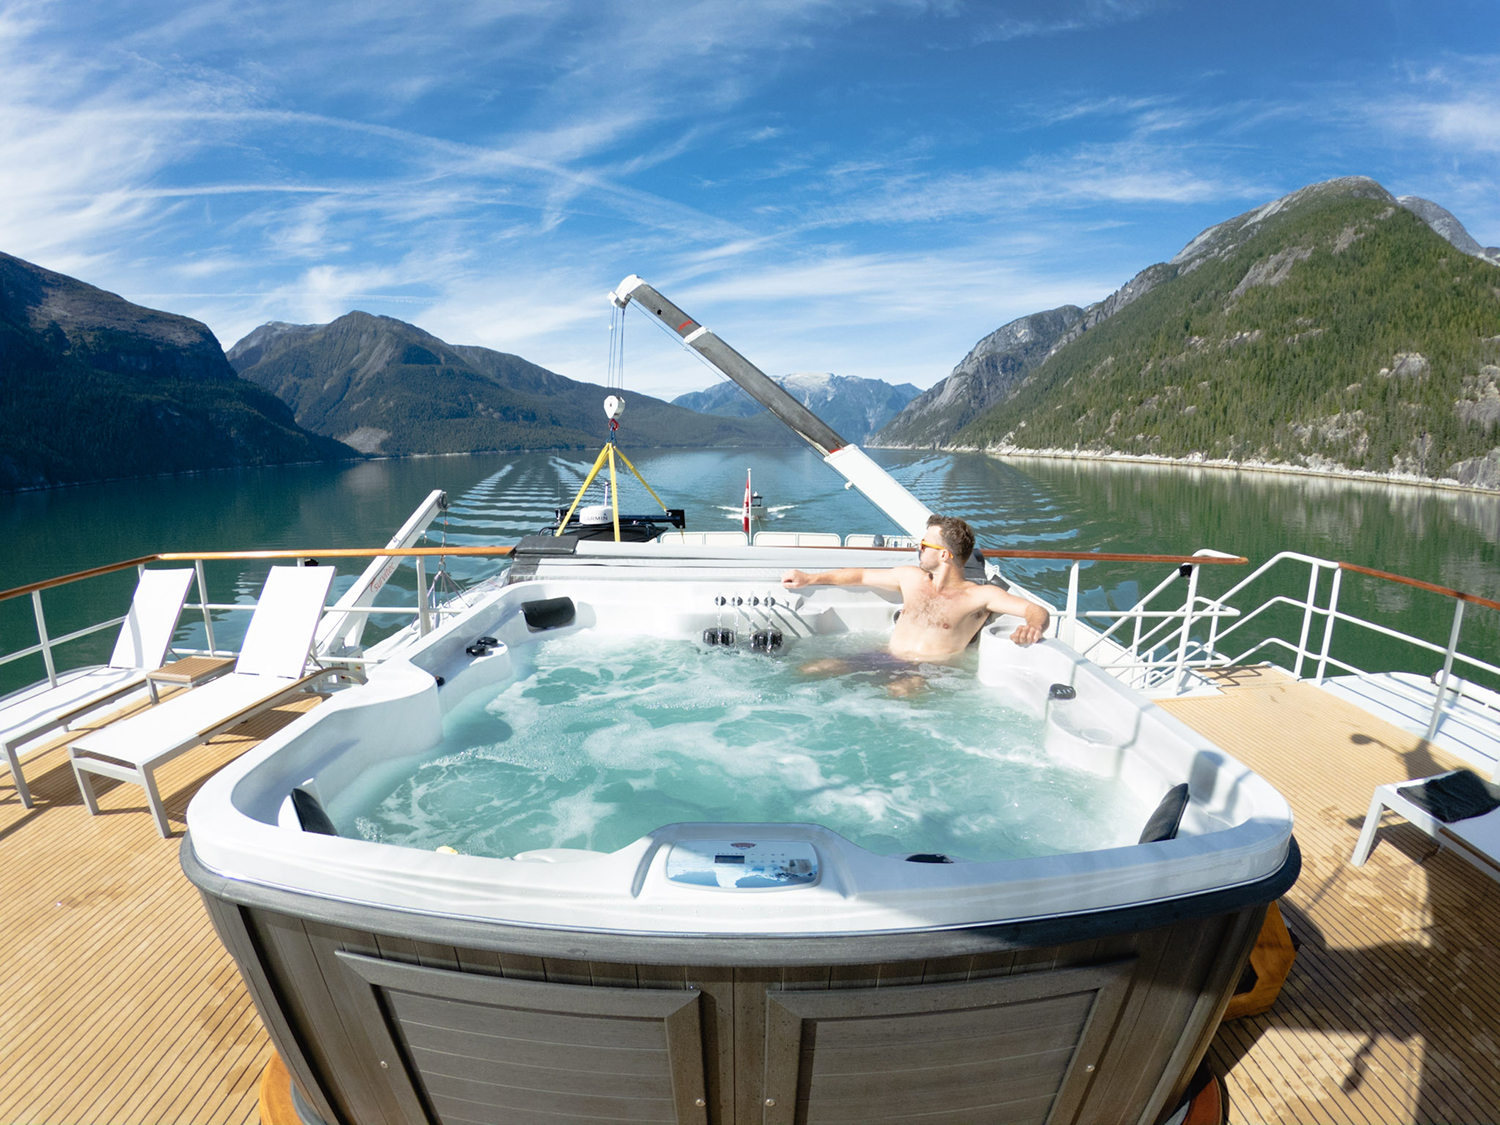 Apres ski soak in the top deck hot tub with a 360-degree view of the Coast Mountain fjords.